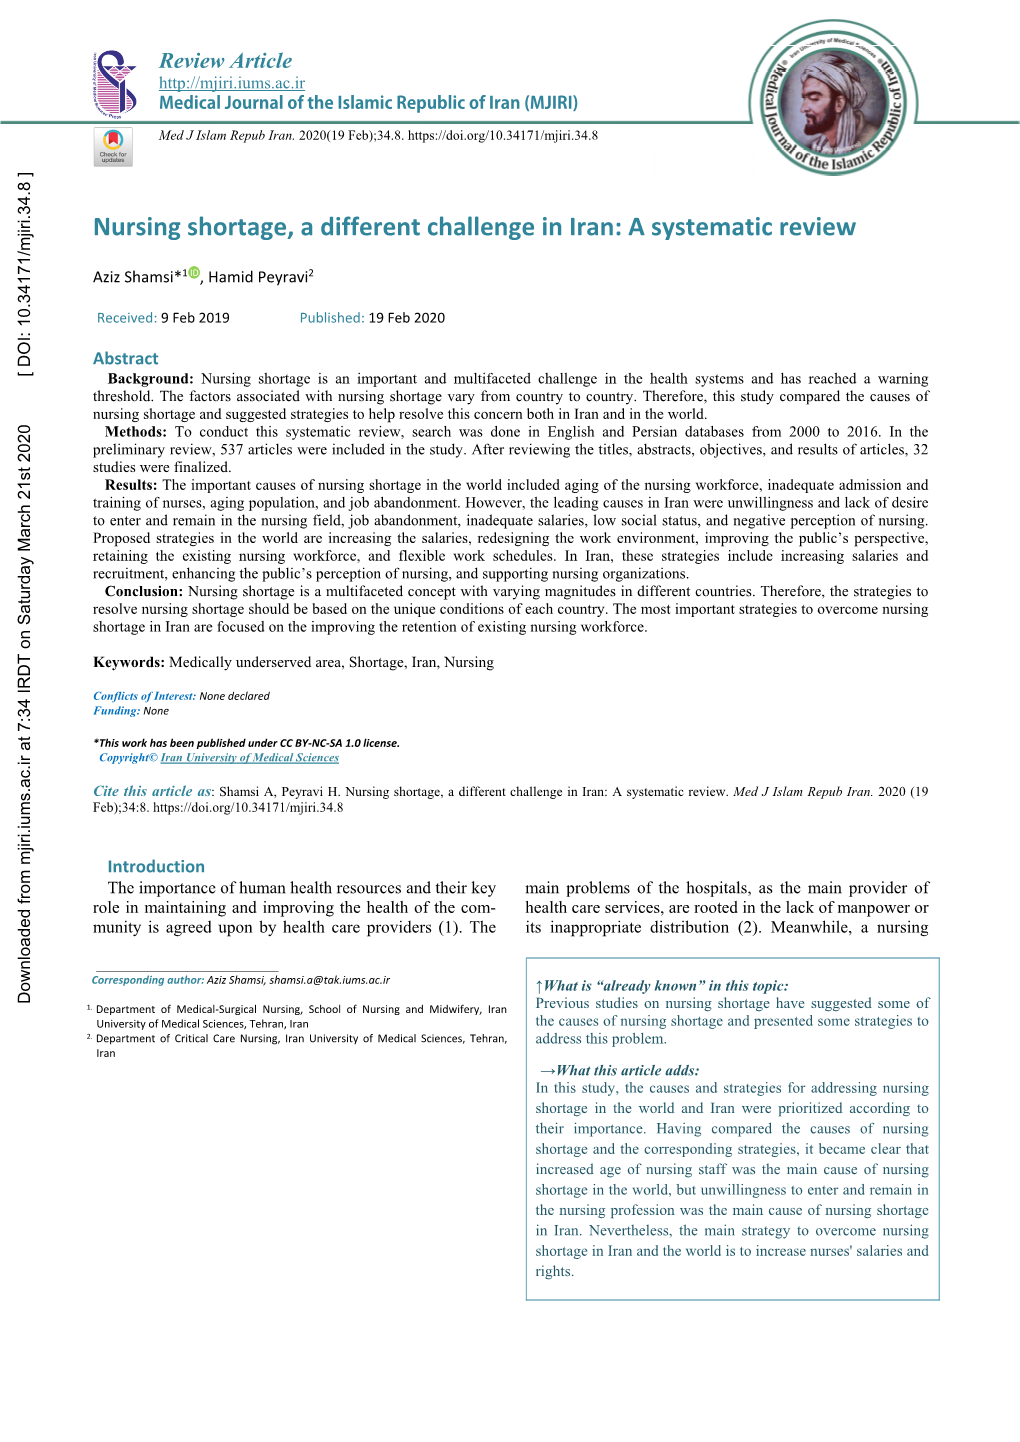 Nursing Shortage, a Different Challenge in Iran: a Systematic Review